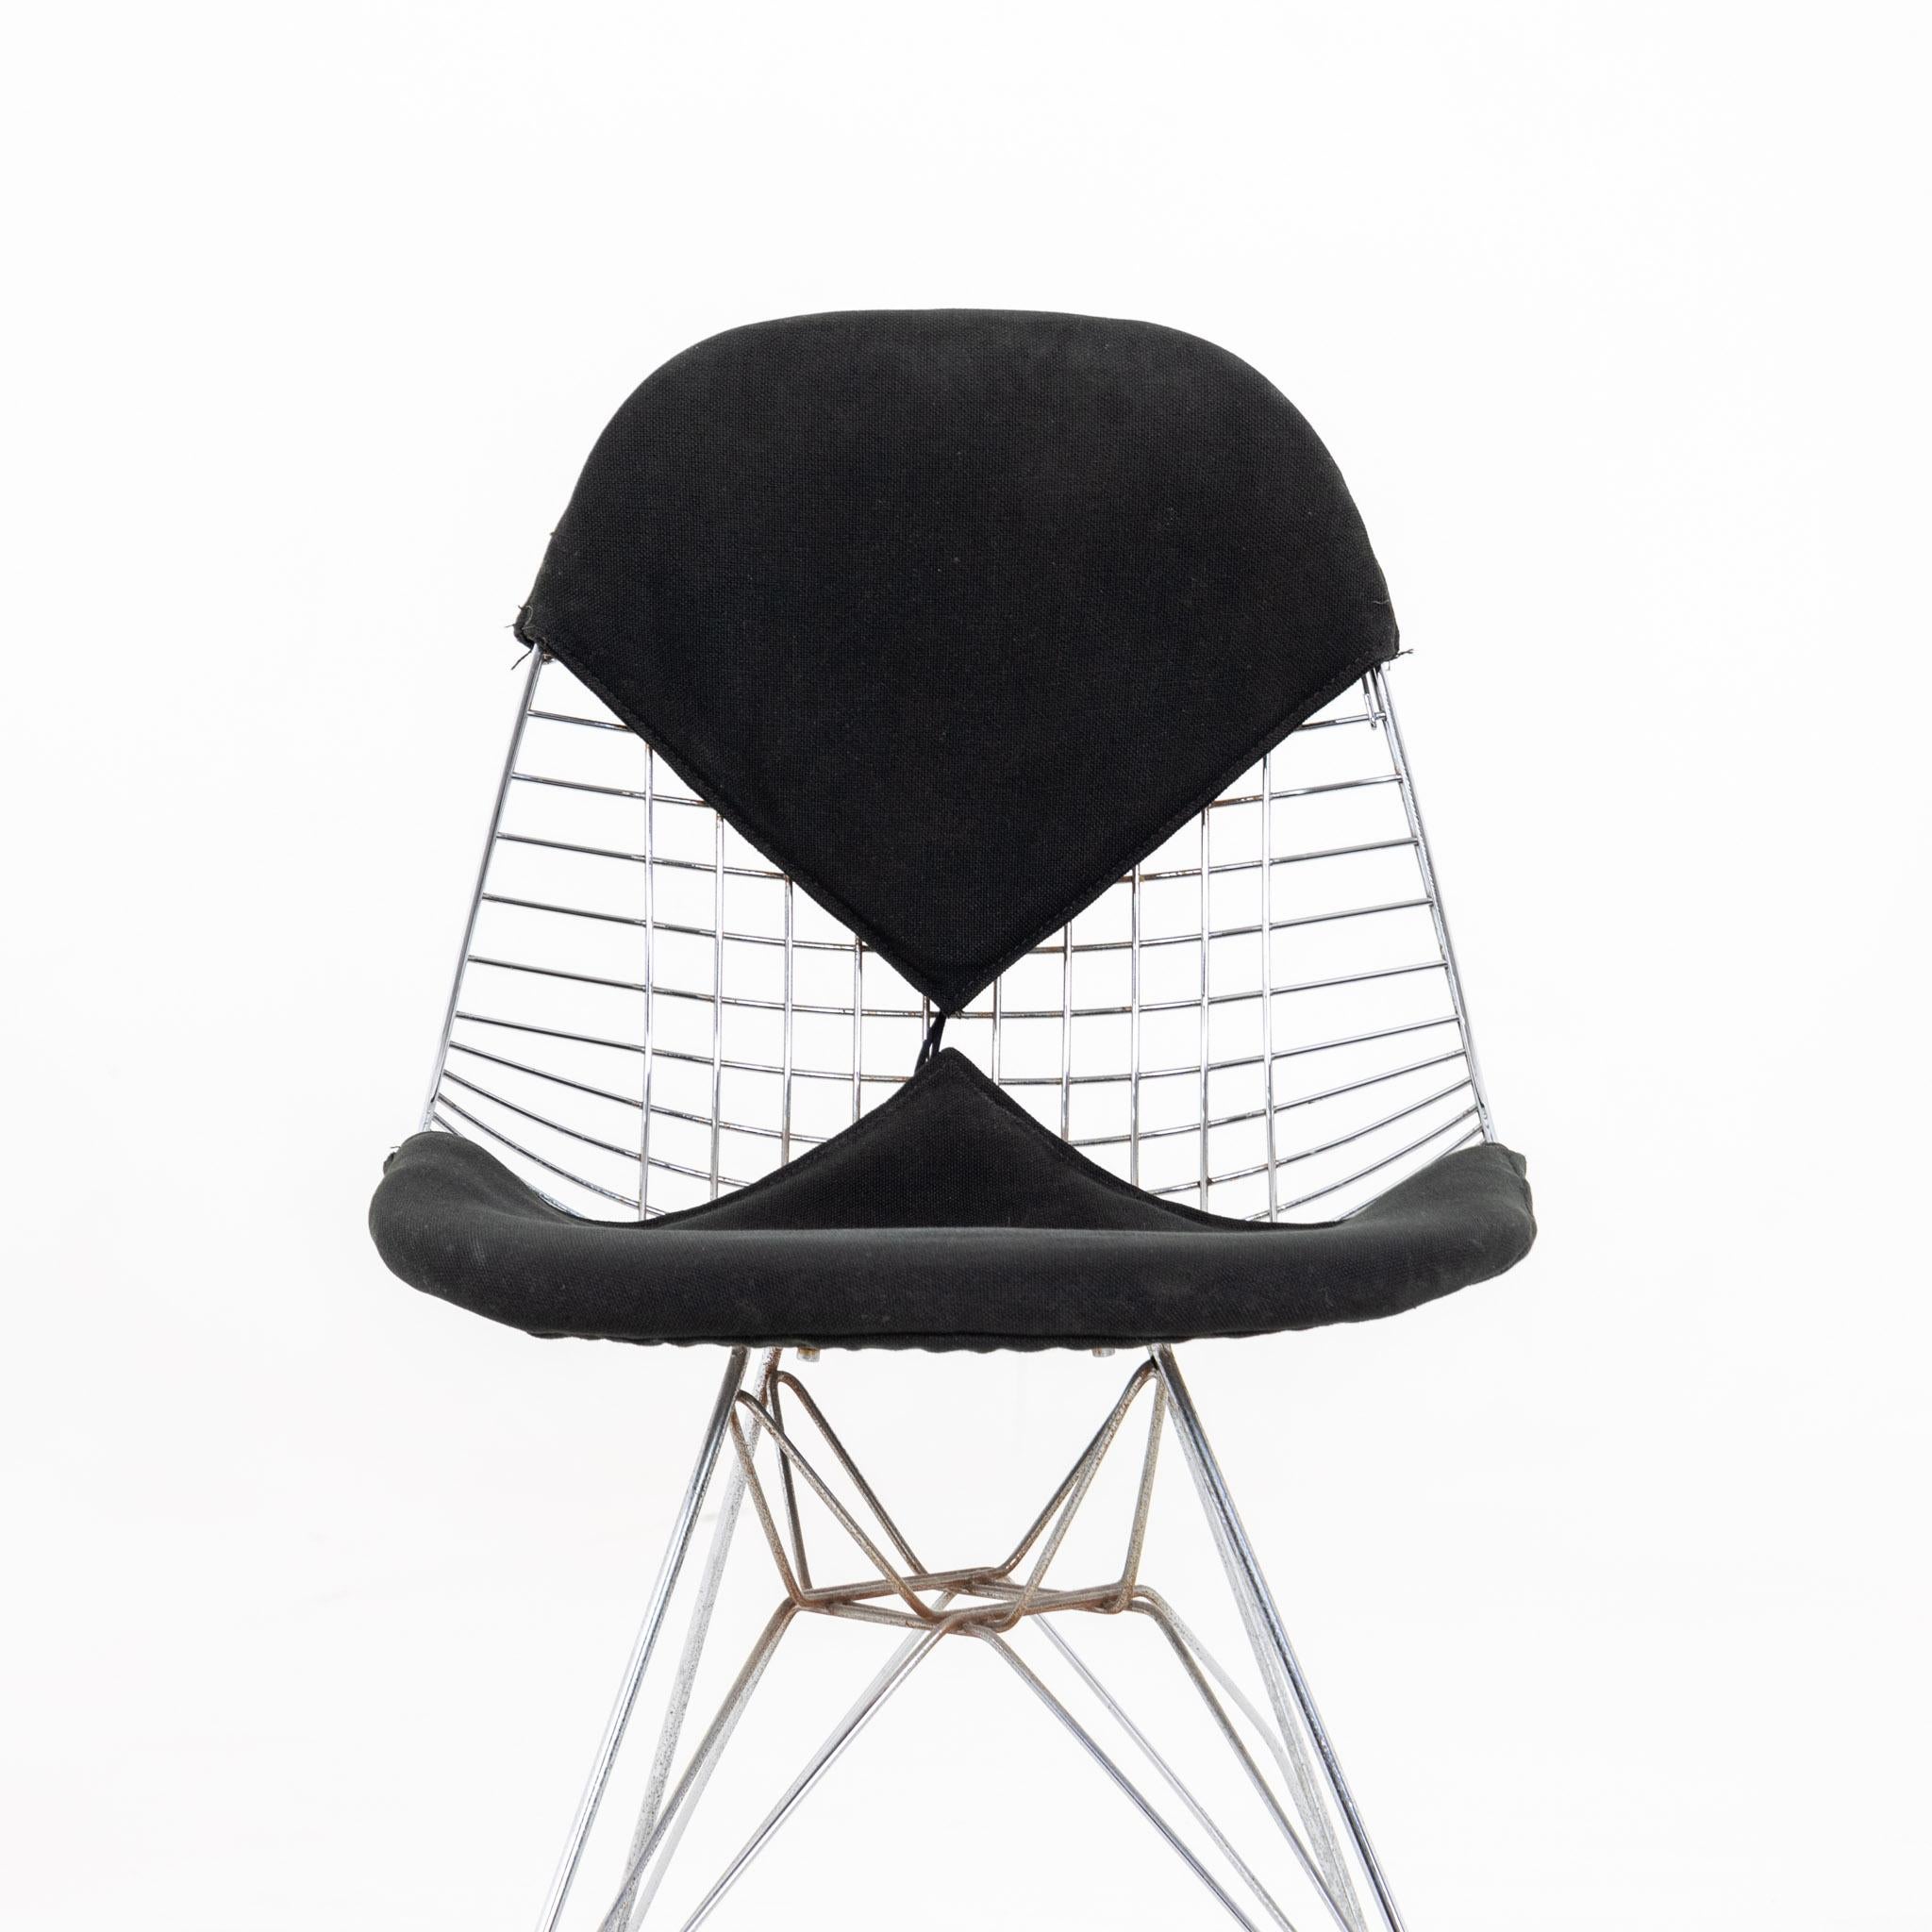 Eames Wire Bikini Chair DKR-2 with Black Cover, Design 1951 For Sale 1